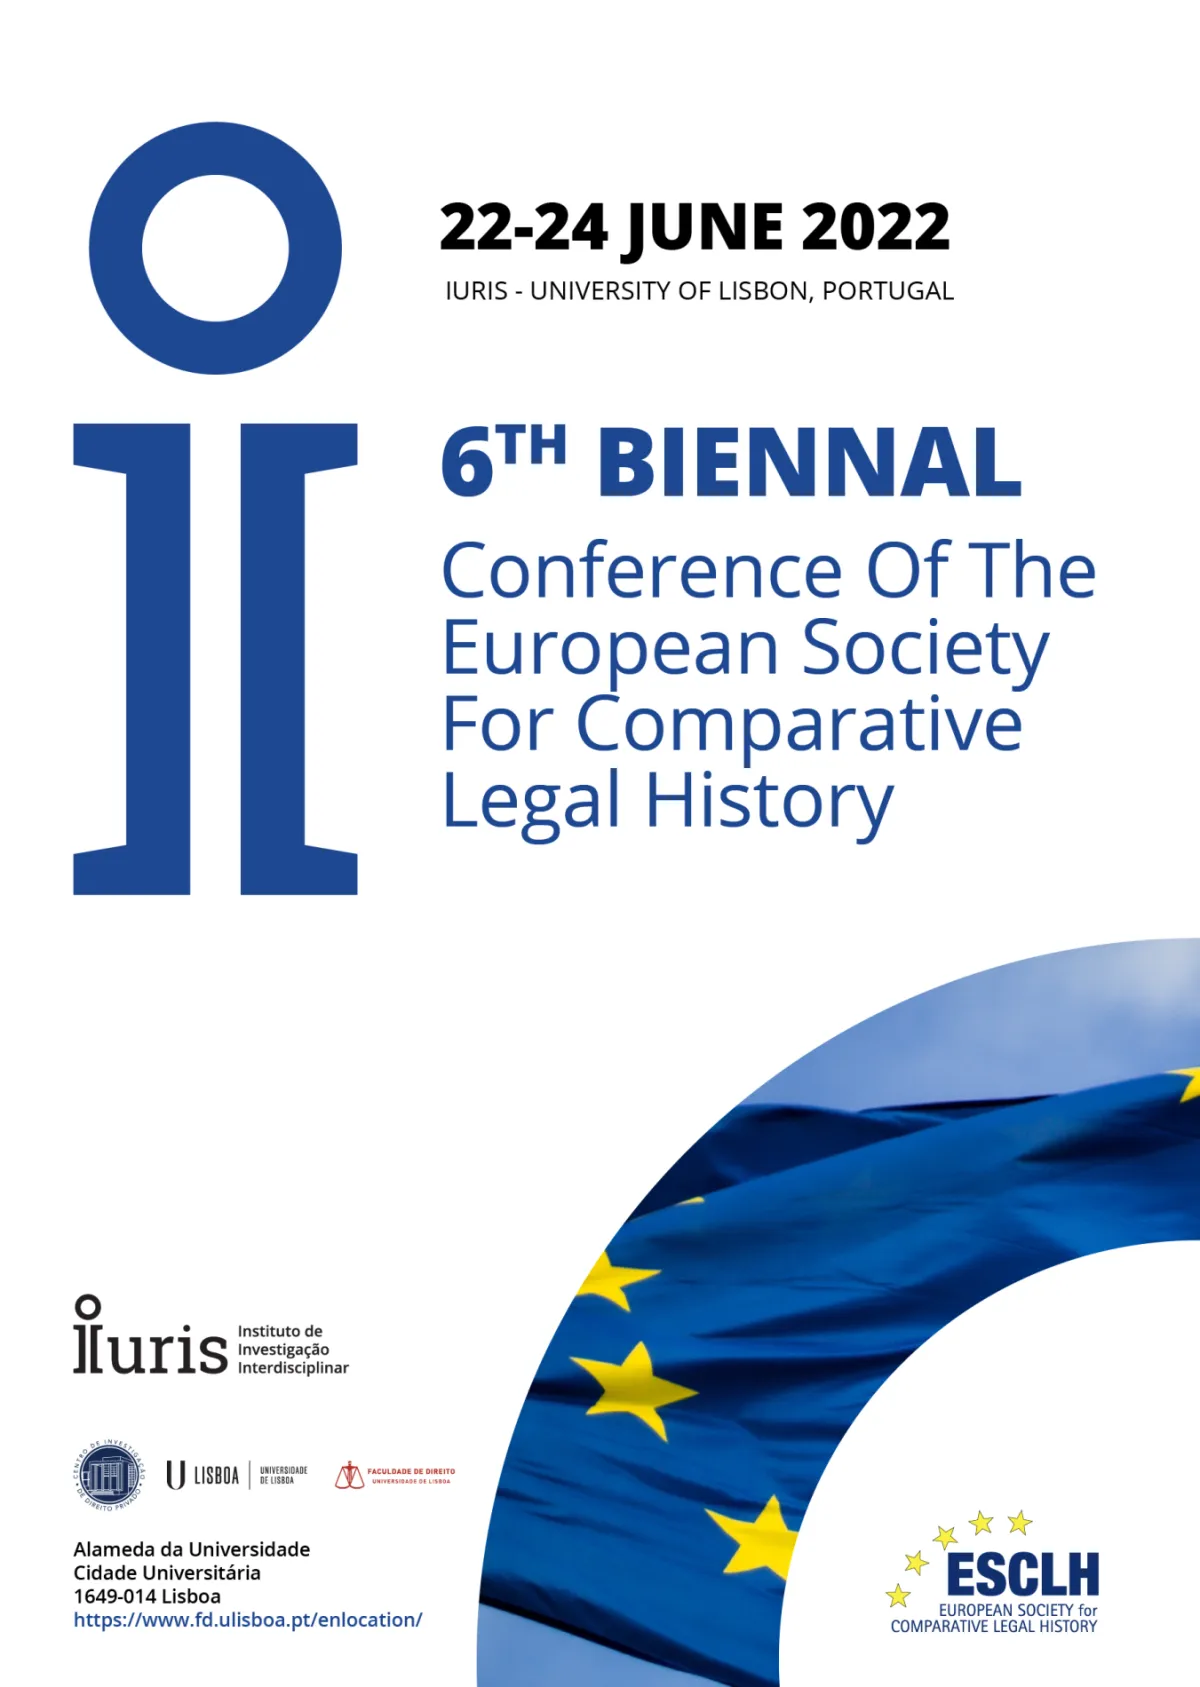 6th Biennal - Conference of the European Society for Comparative Legal History